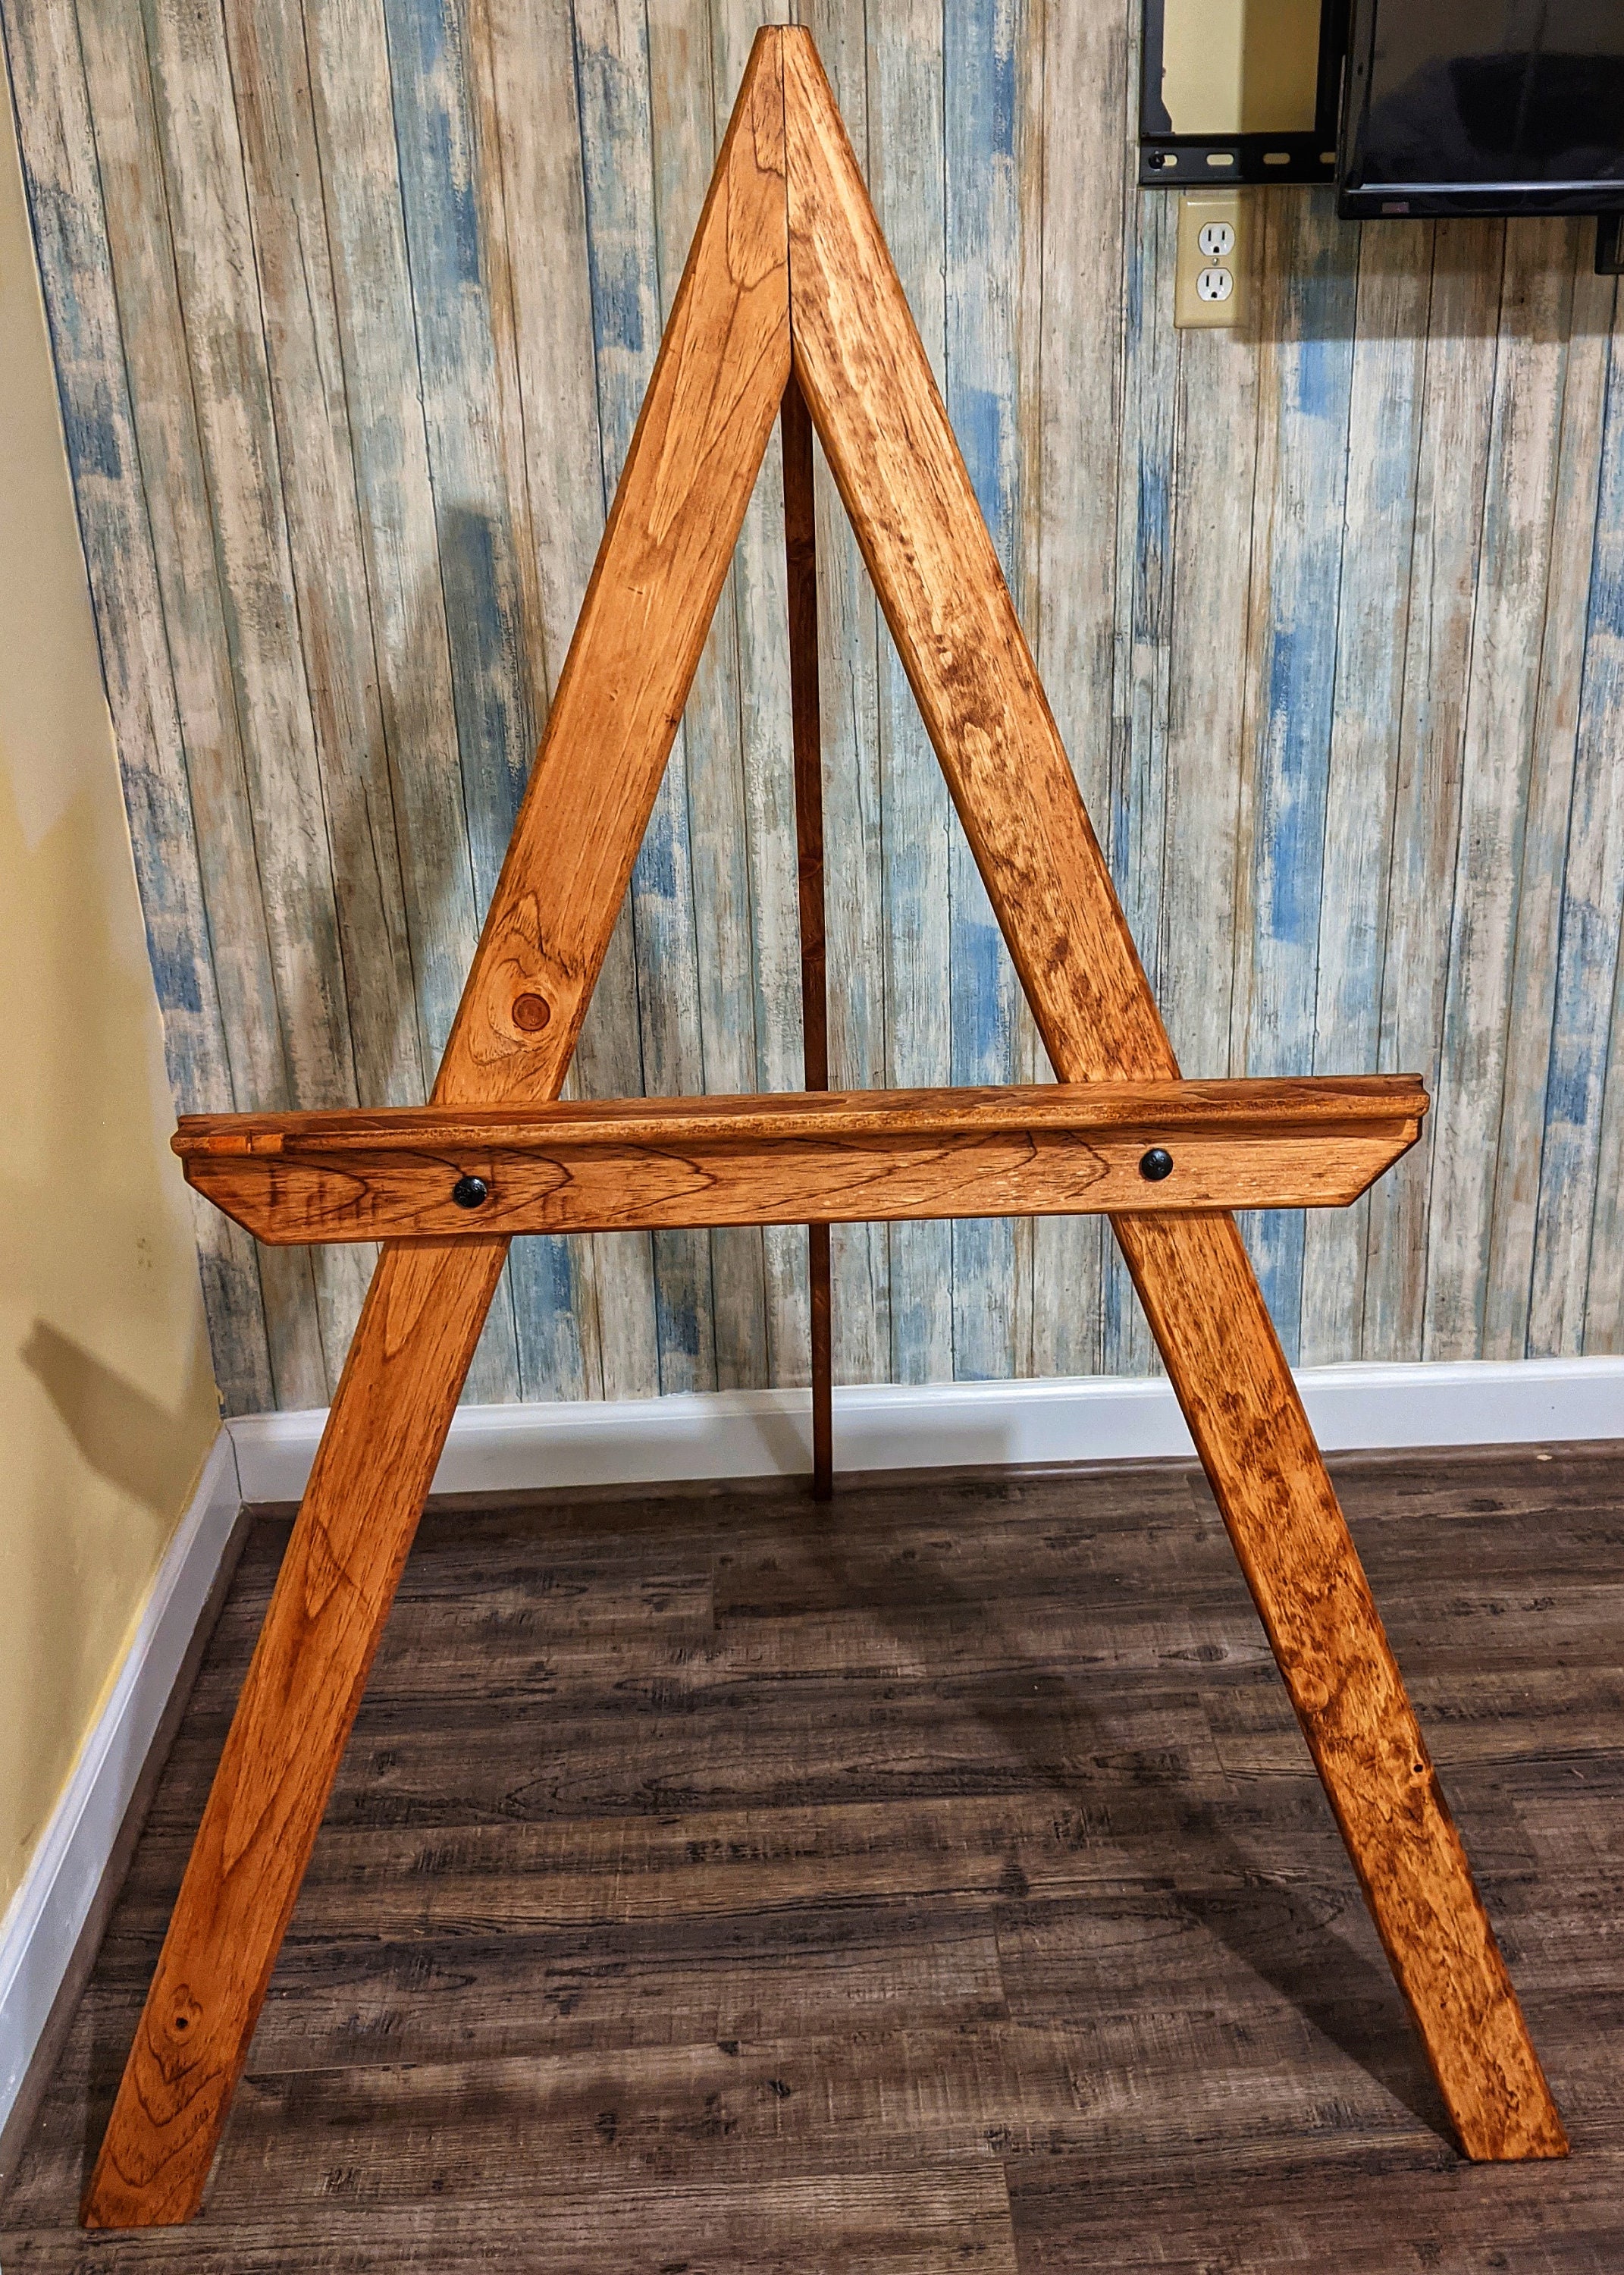 Rustic Easel Style Wooden Tripod (Picture Frame Stand) Isolated On White  With Clipping Path Stock Photo, Picture and Royalty Free Image. Image  43898187.